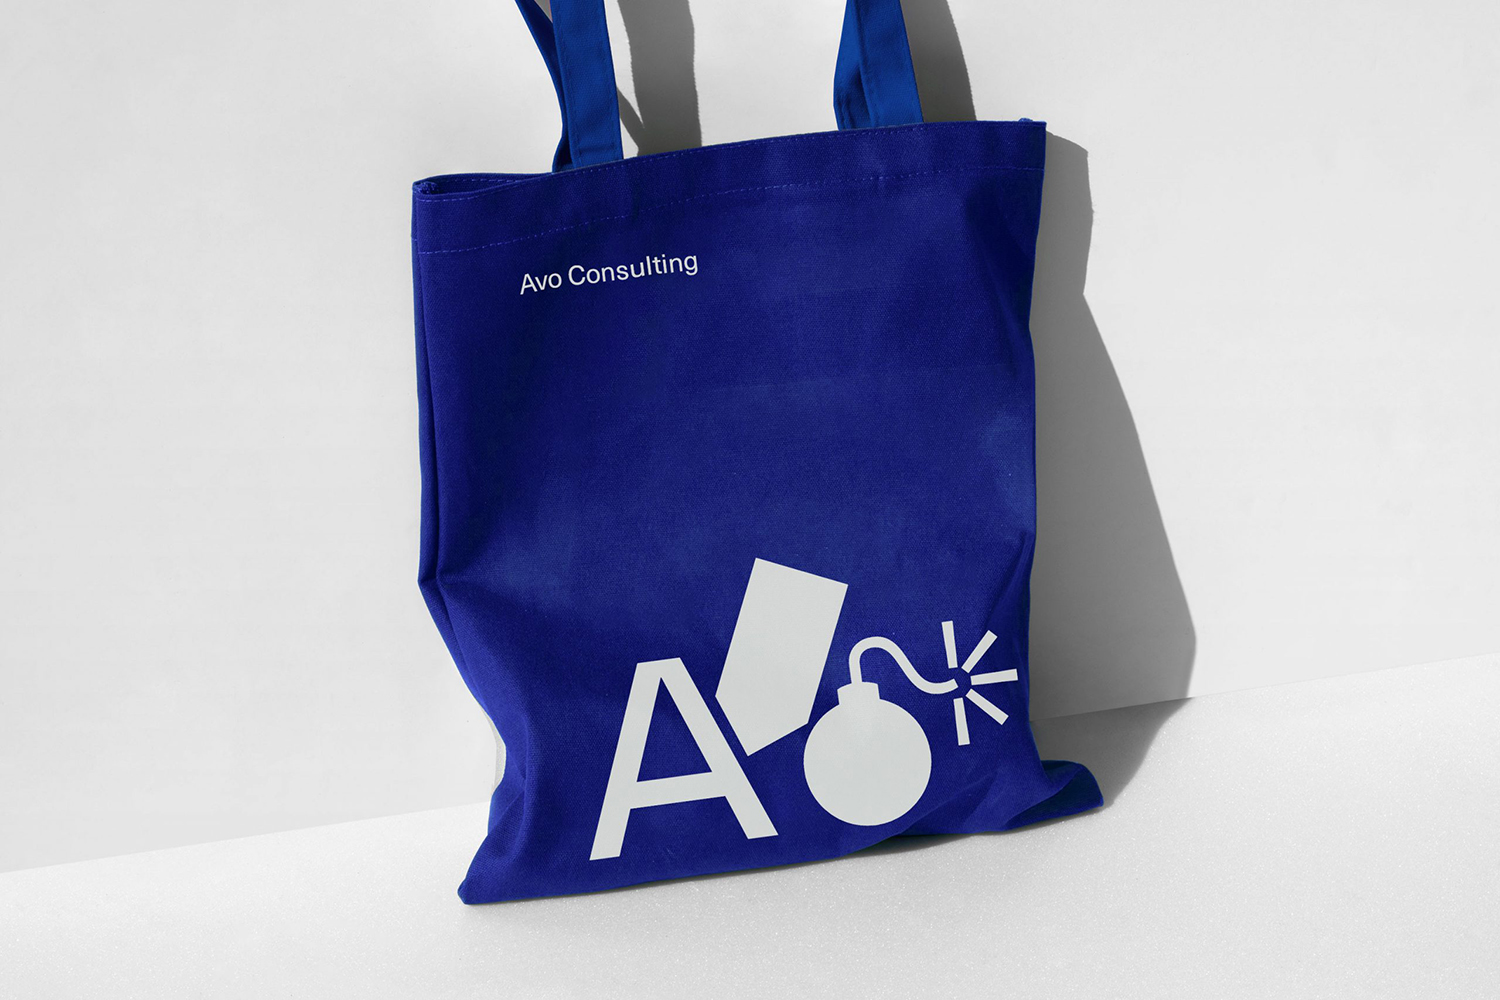 Tote Bag Design – Avo Consulting by Bleed